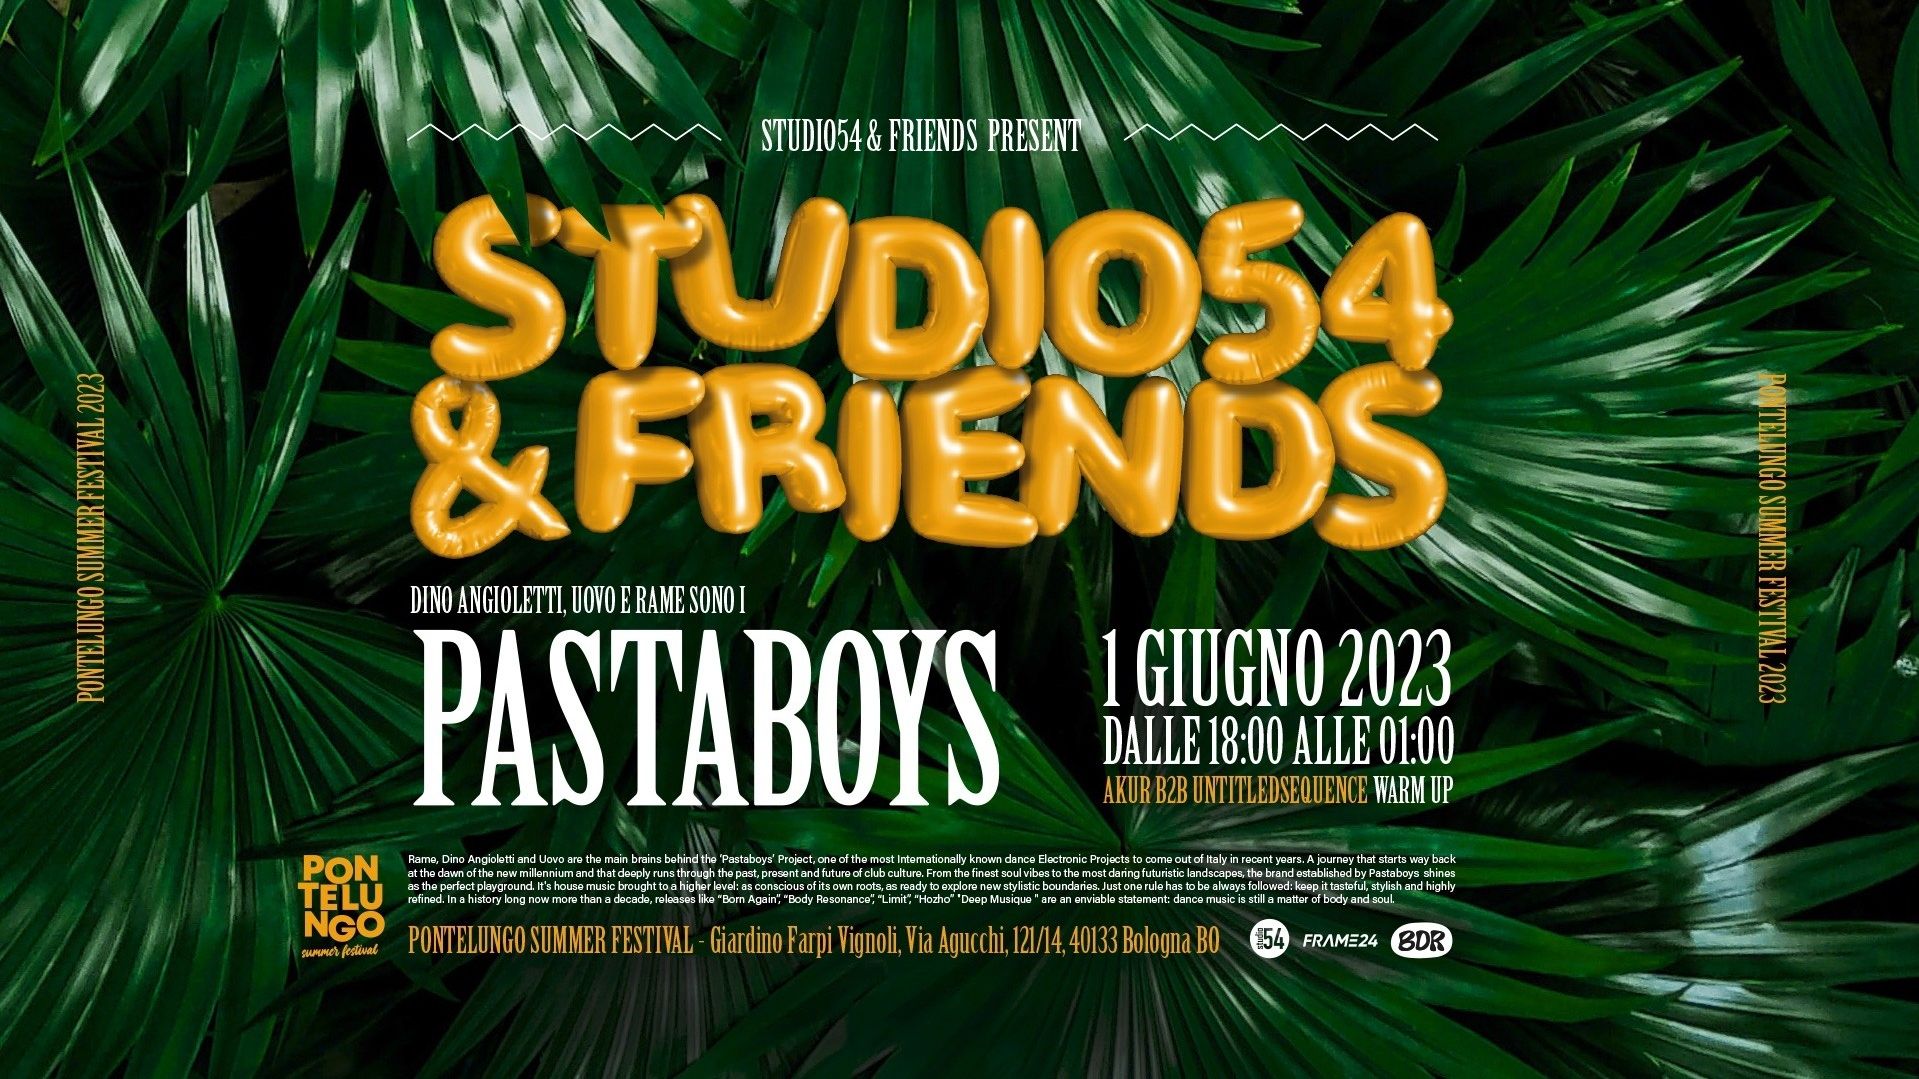 Pastaboys in The Garden #1 with Bdr At Pontelungo